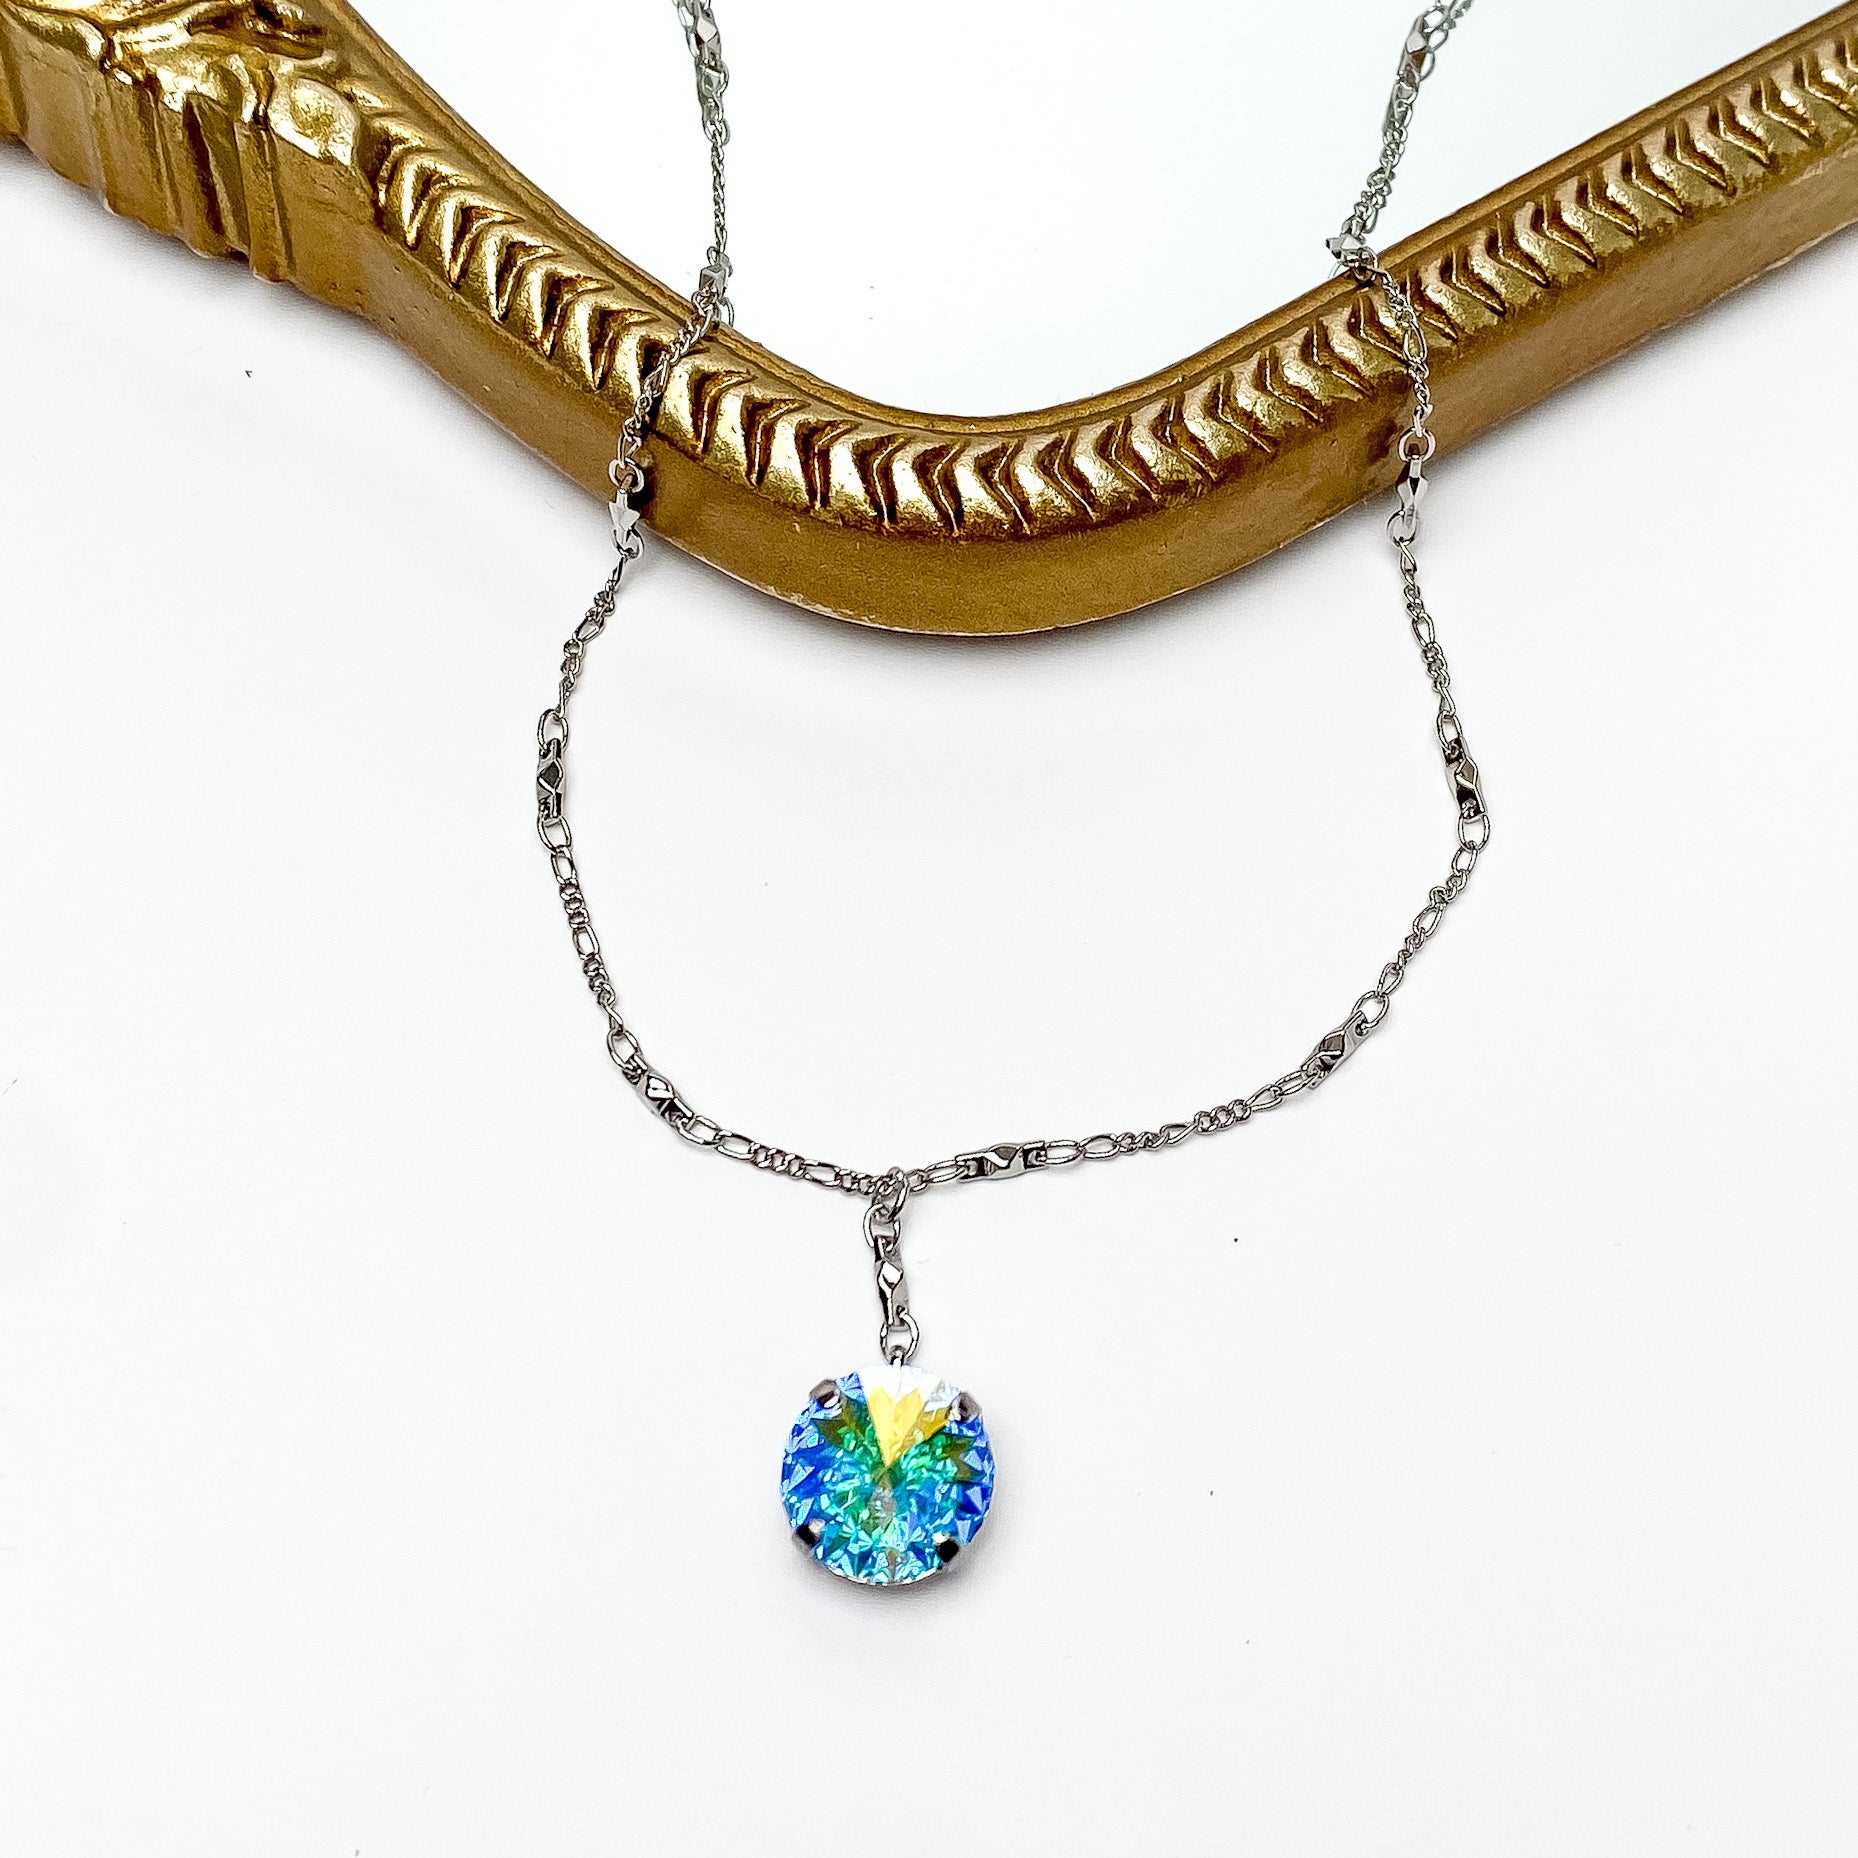 Pictured is a silver necklace with a ab crystal pendant. This necklace is pictured laying partially on a gold mirror on a white background. 